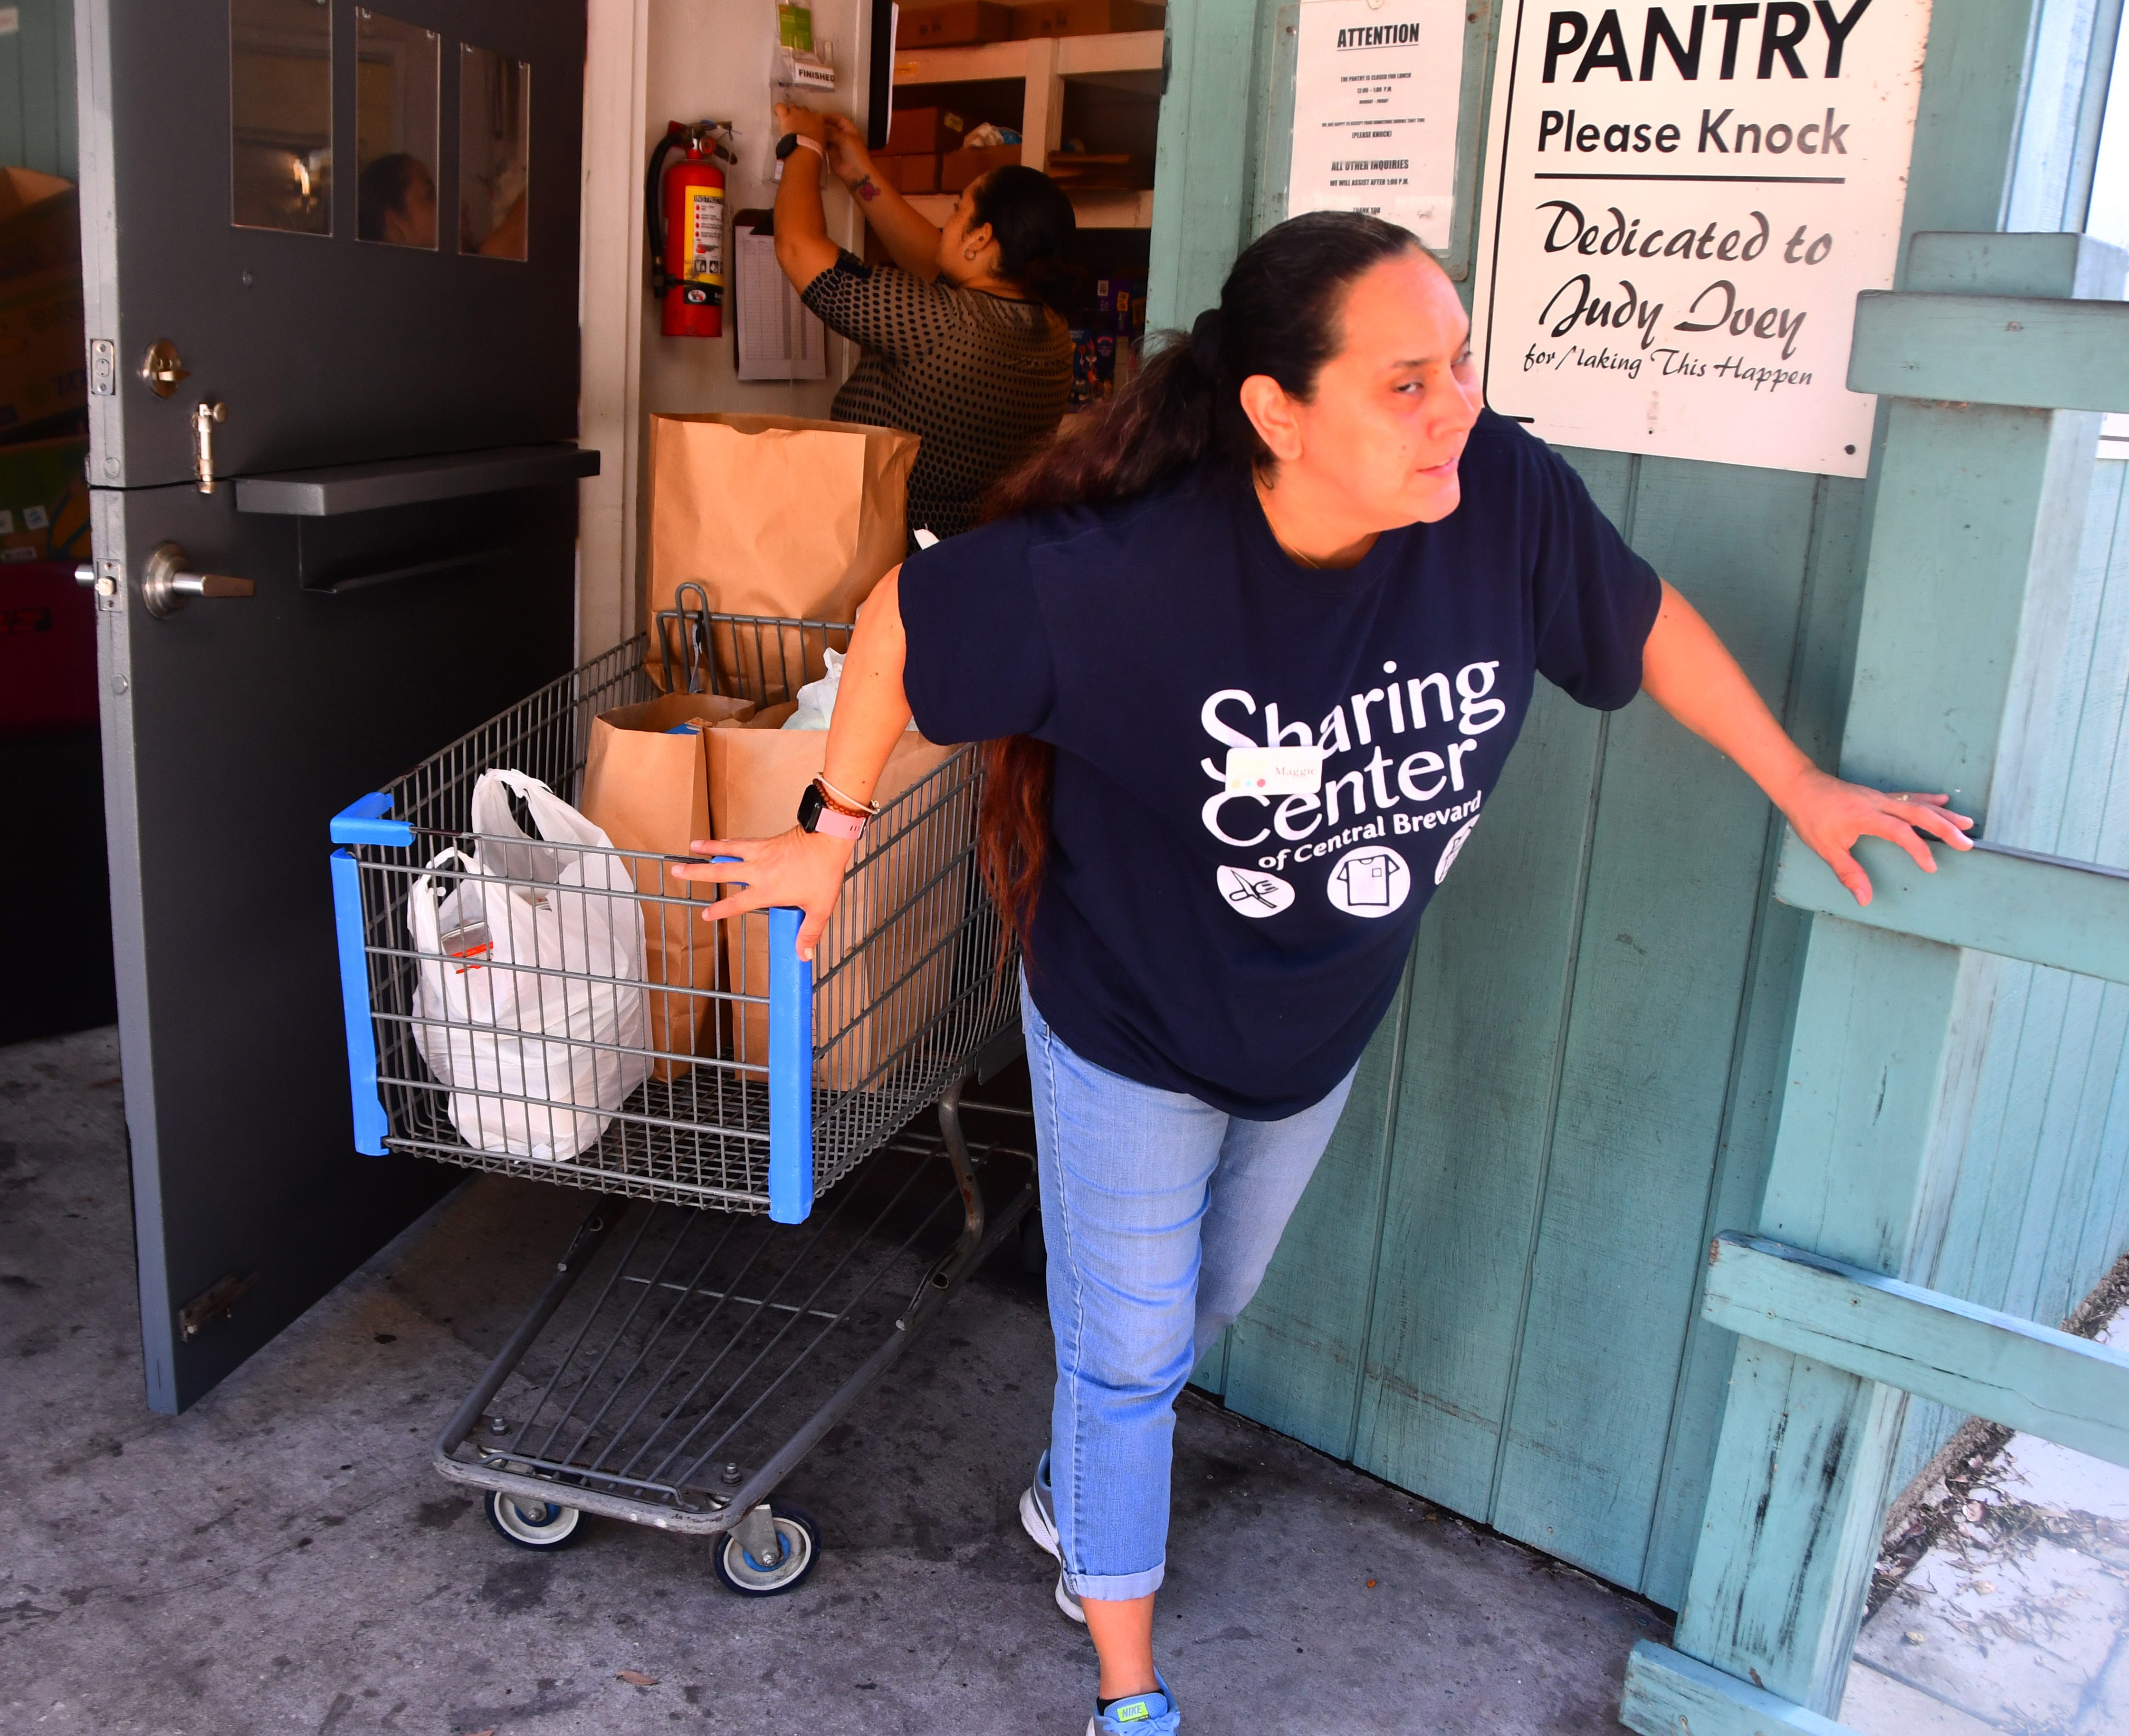 Central Brevard Sharing Center employee Maggie Caro wheels out a cart of groceries for a client.